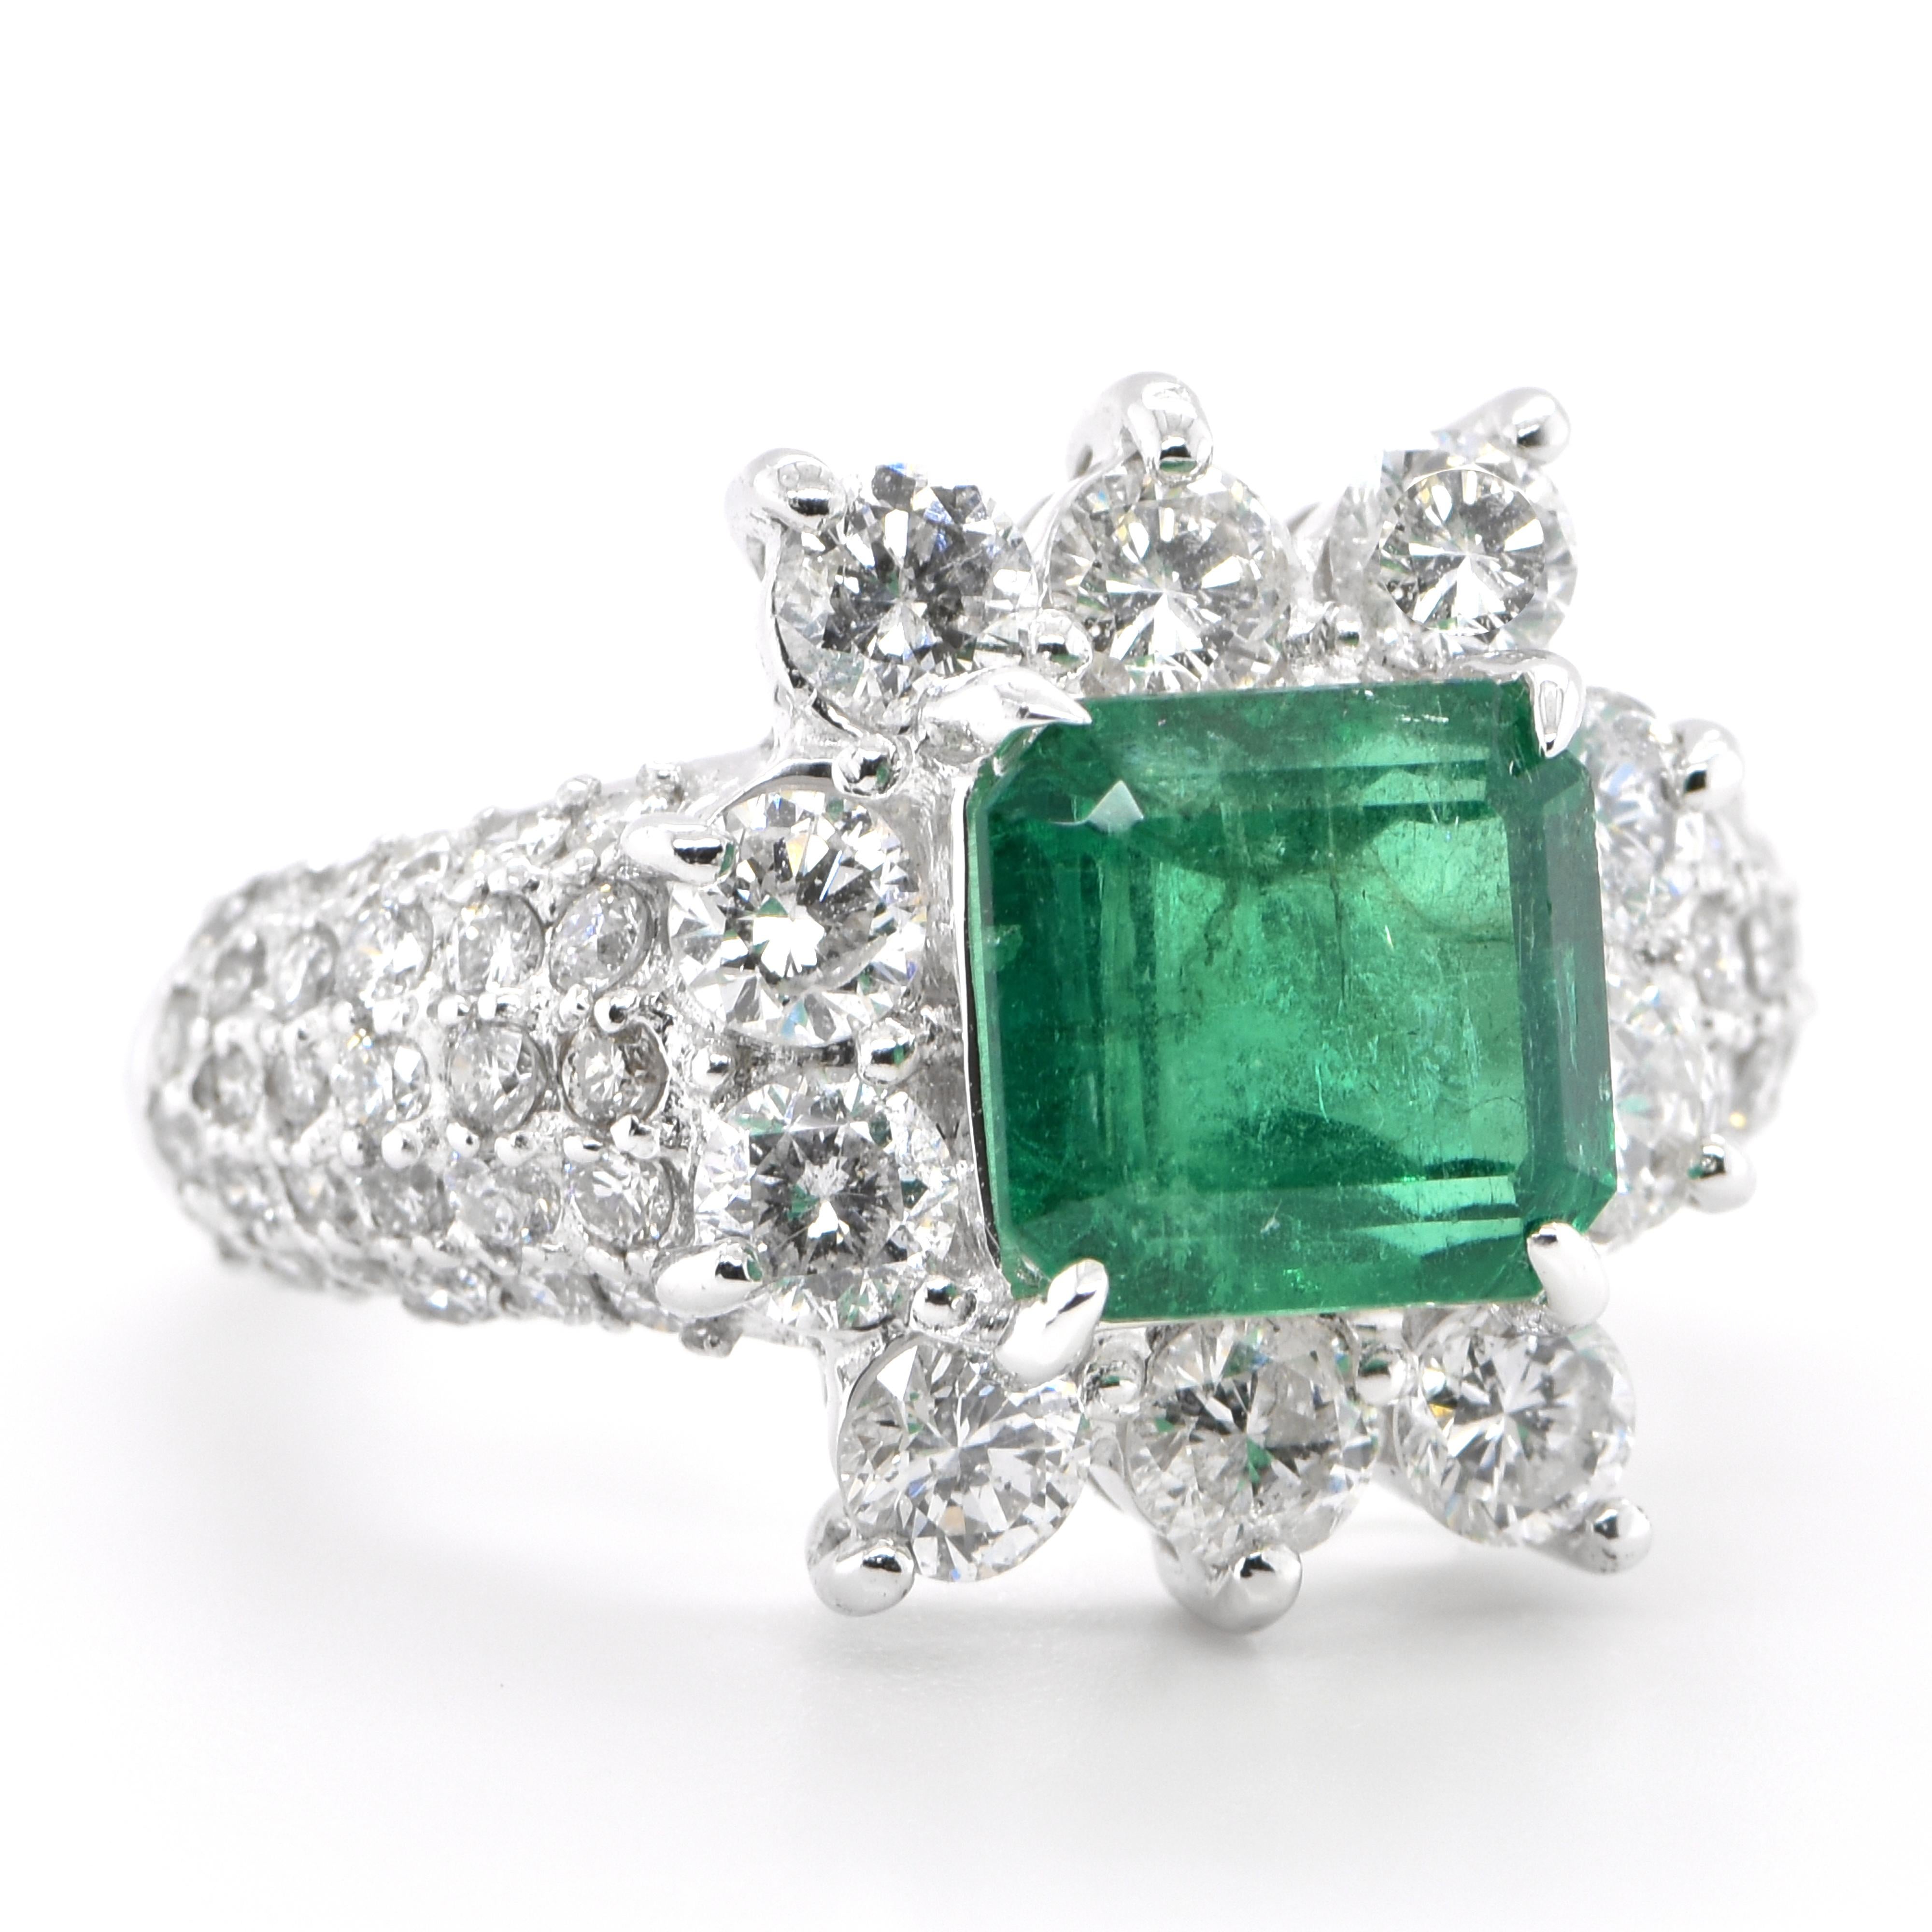 Modern 2.63 Carat Natural Emerald and Diamond Cocktail Ring Set in Platinum For Sale